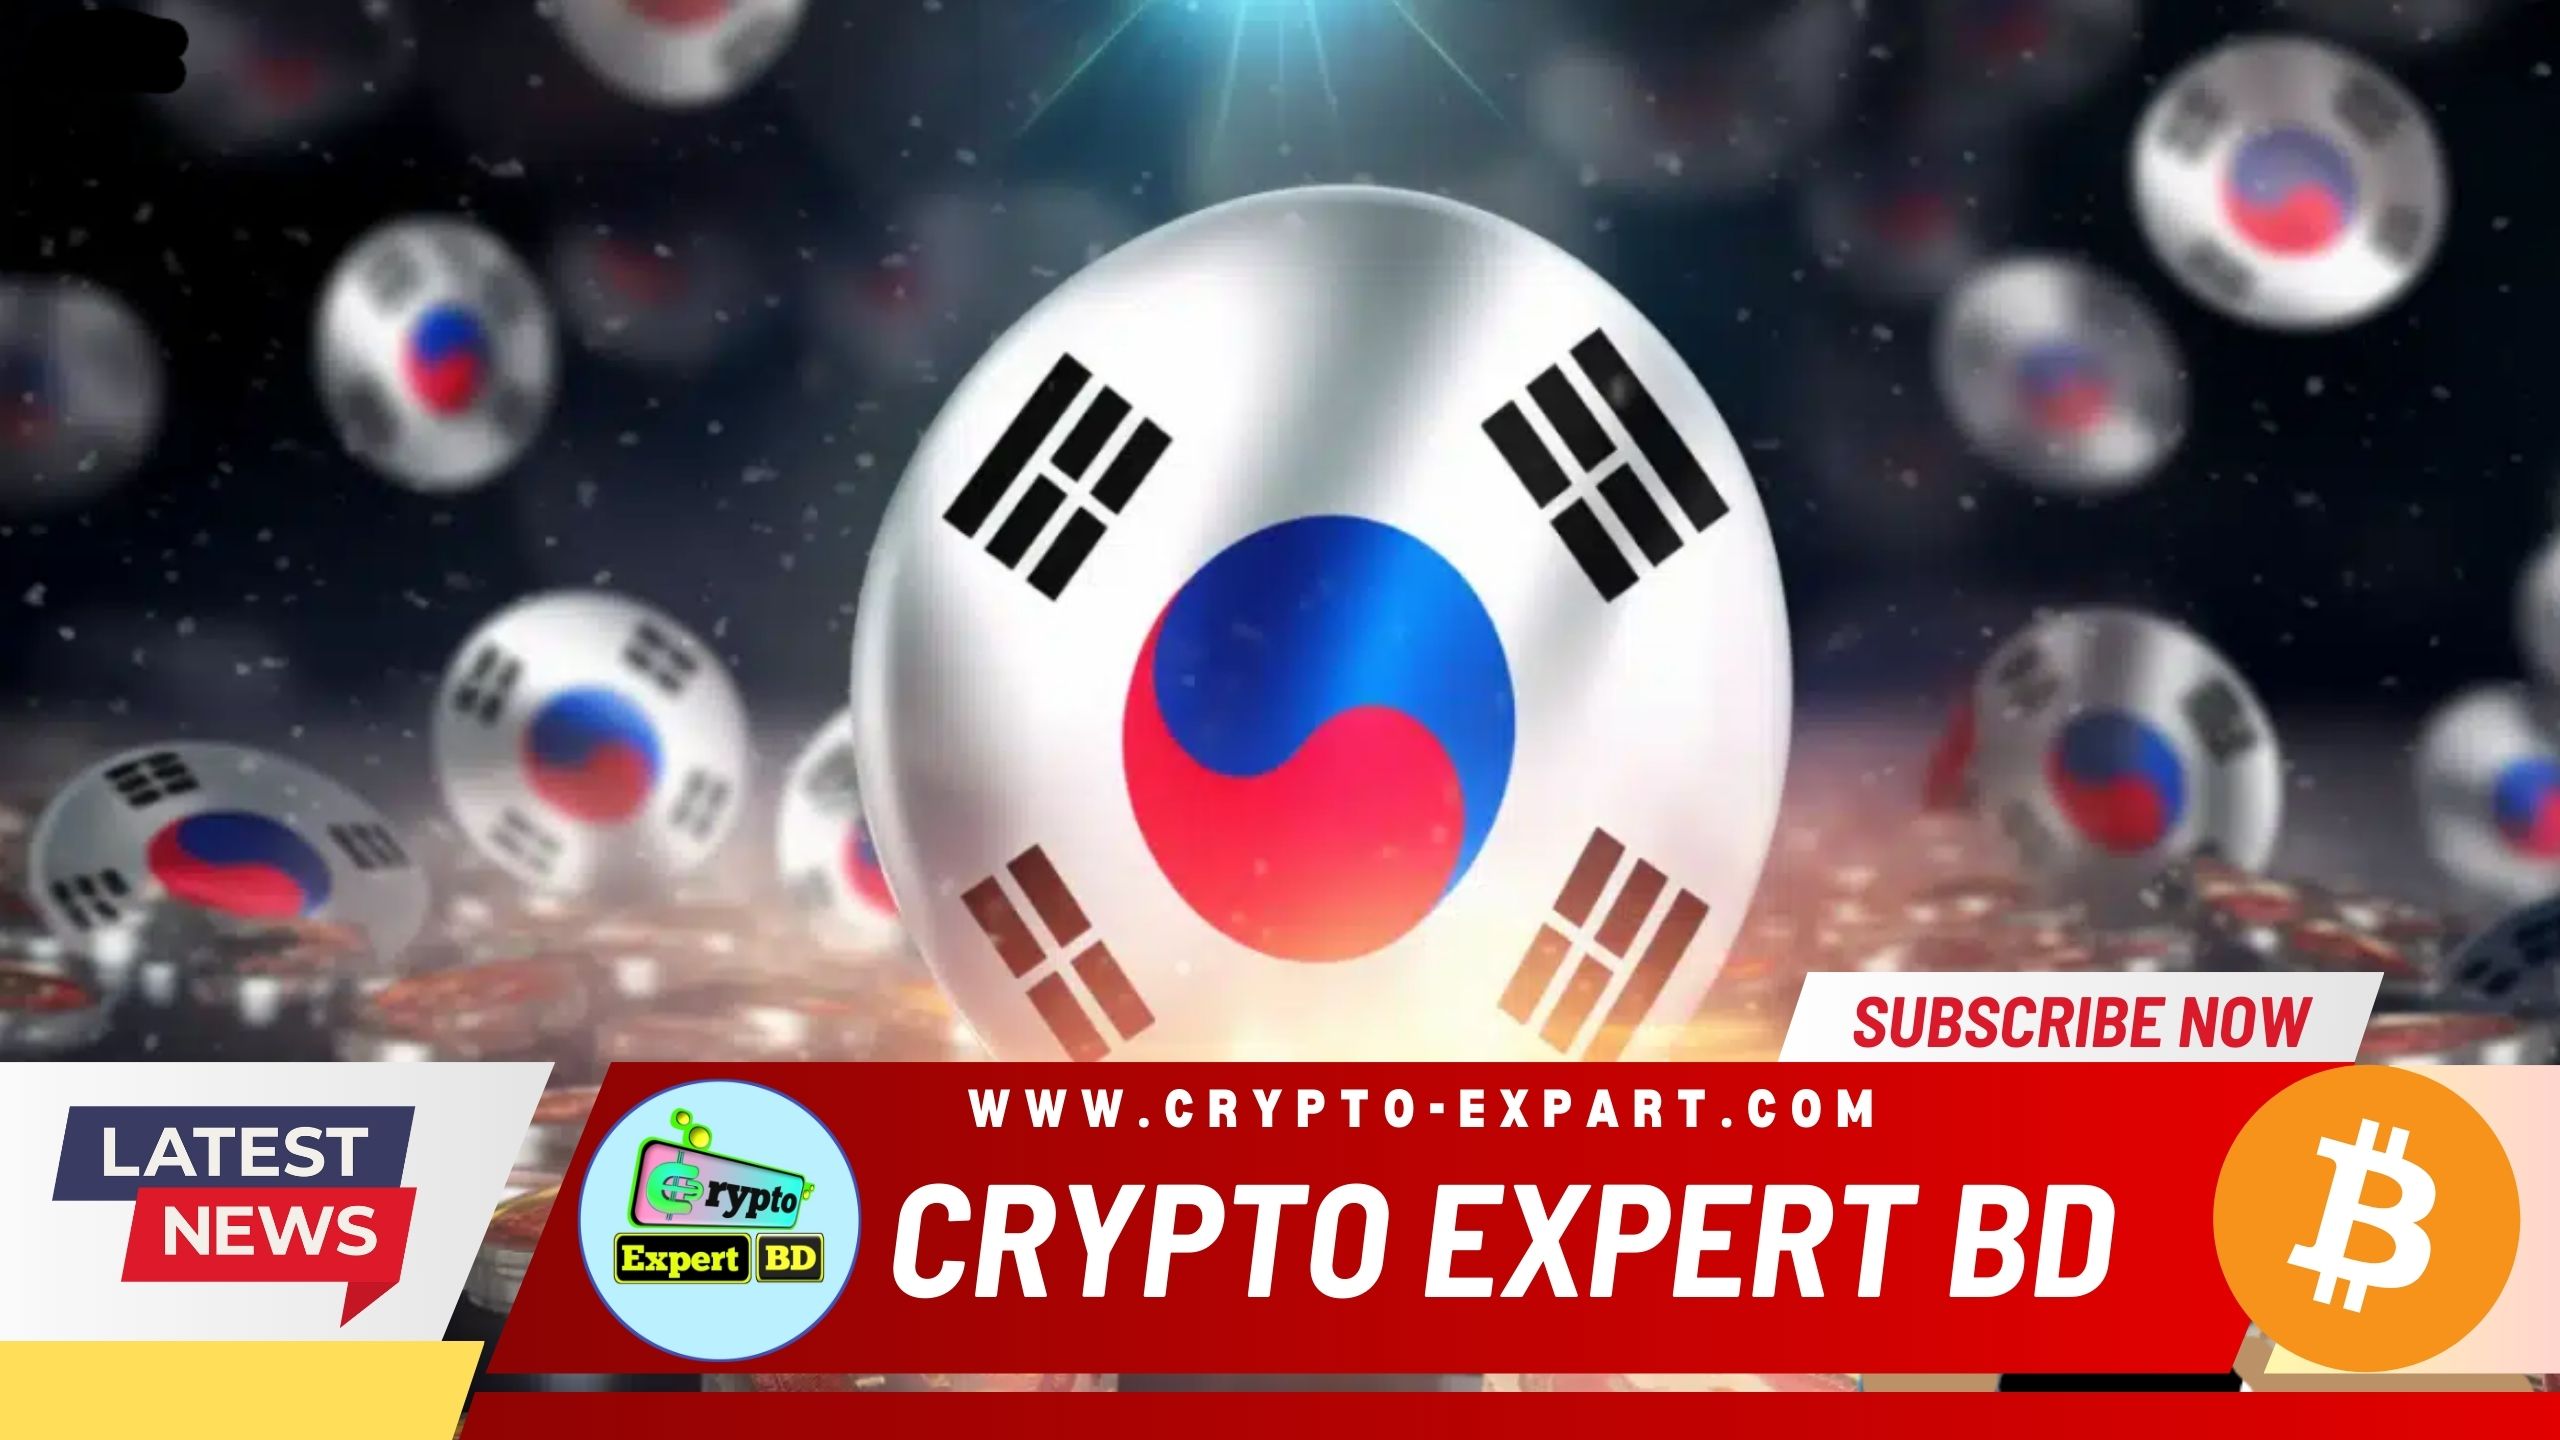 South Korean Won Surpasses USD as Leading Currency for Crypto Trading Globally